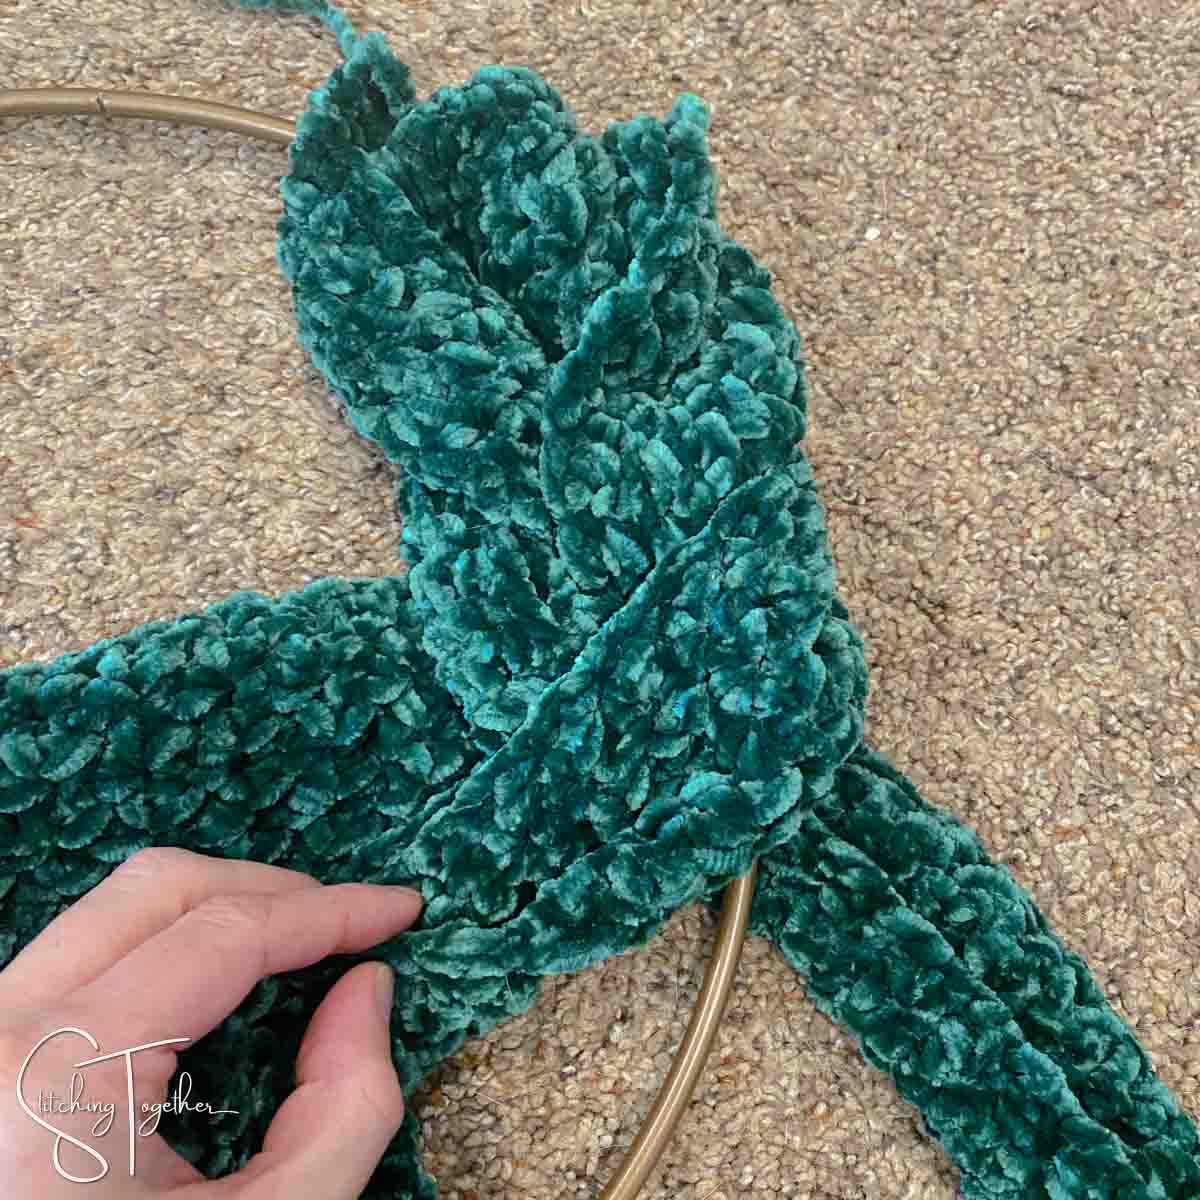 3 strips of green crochet fabric being braided around a metal ring